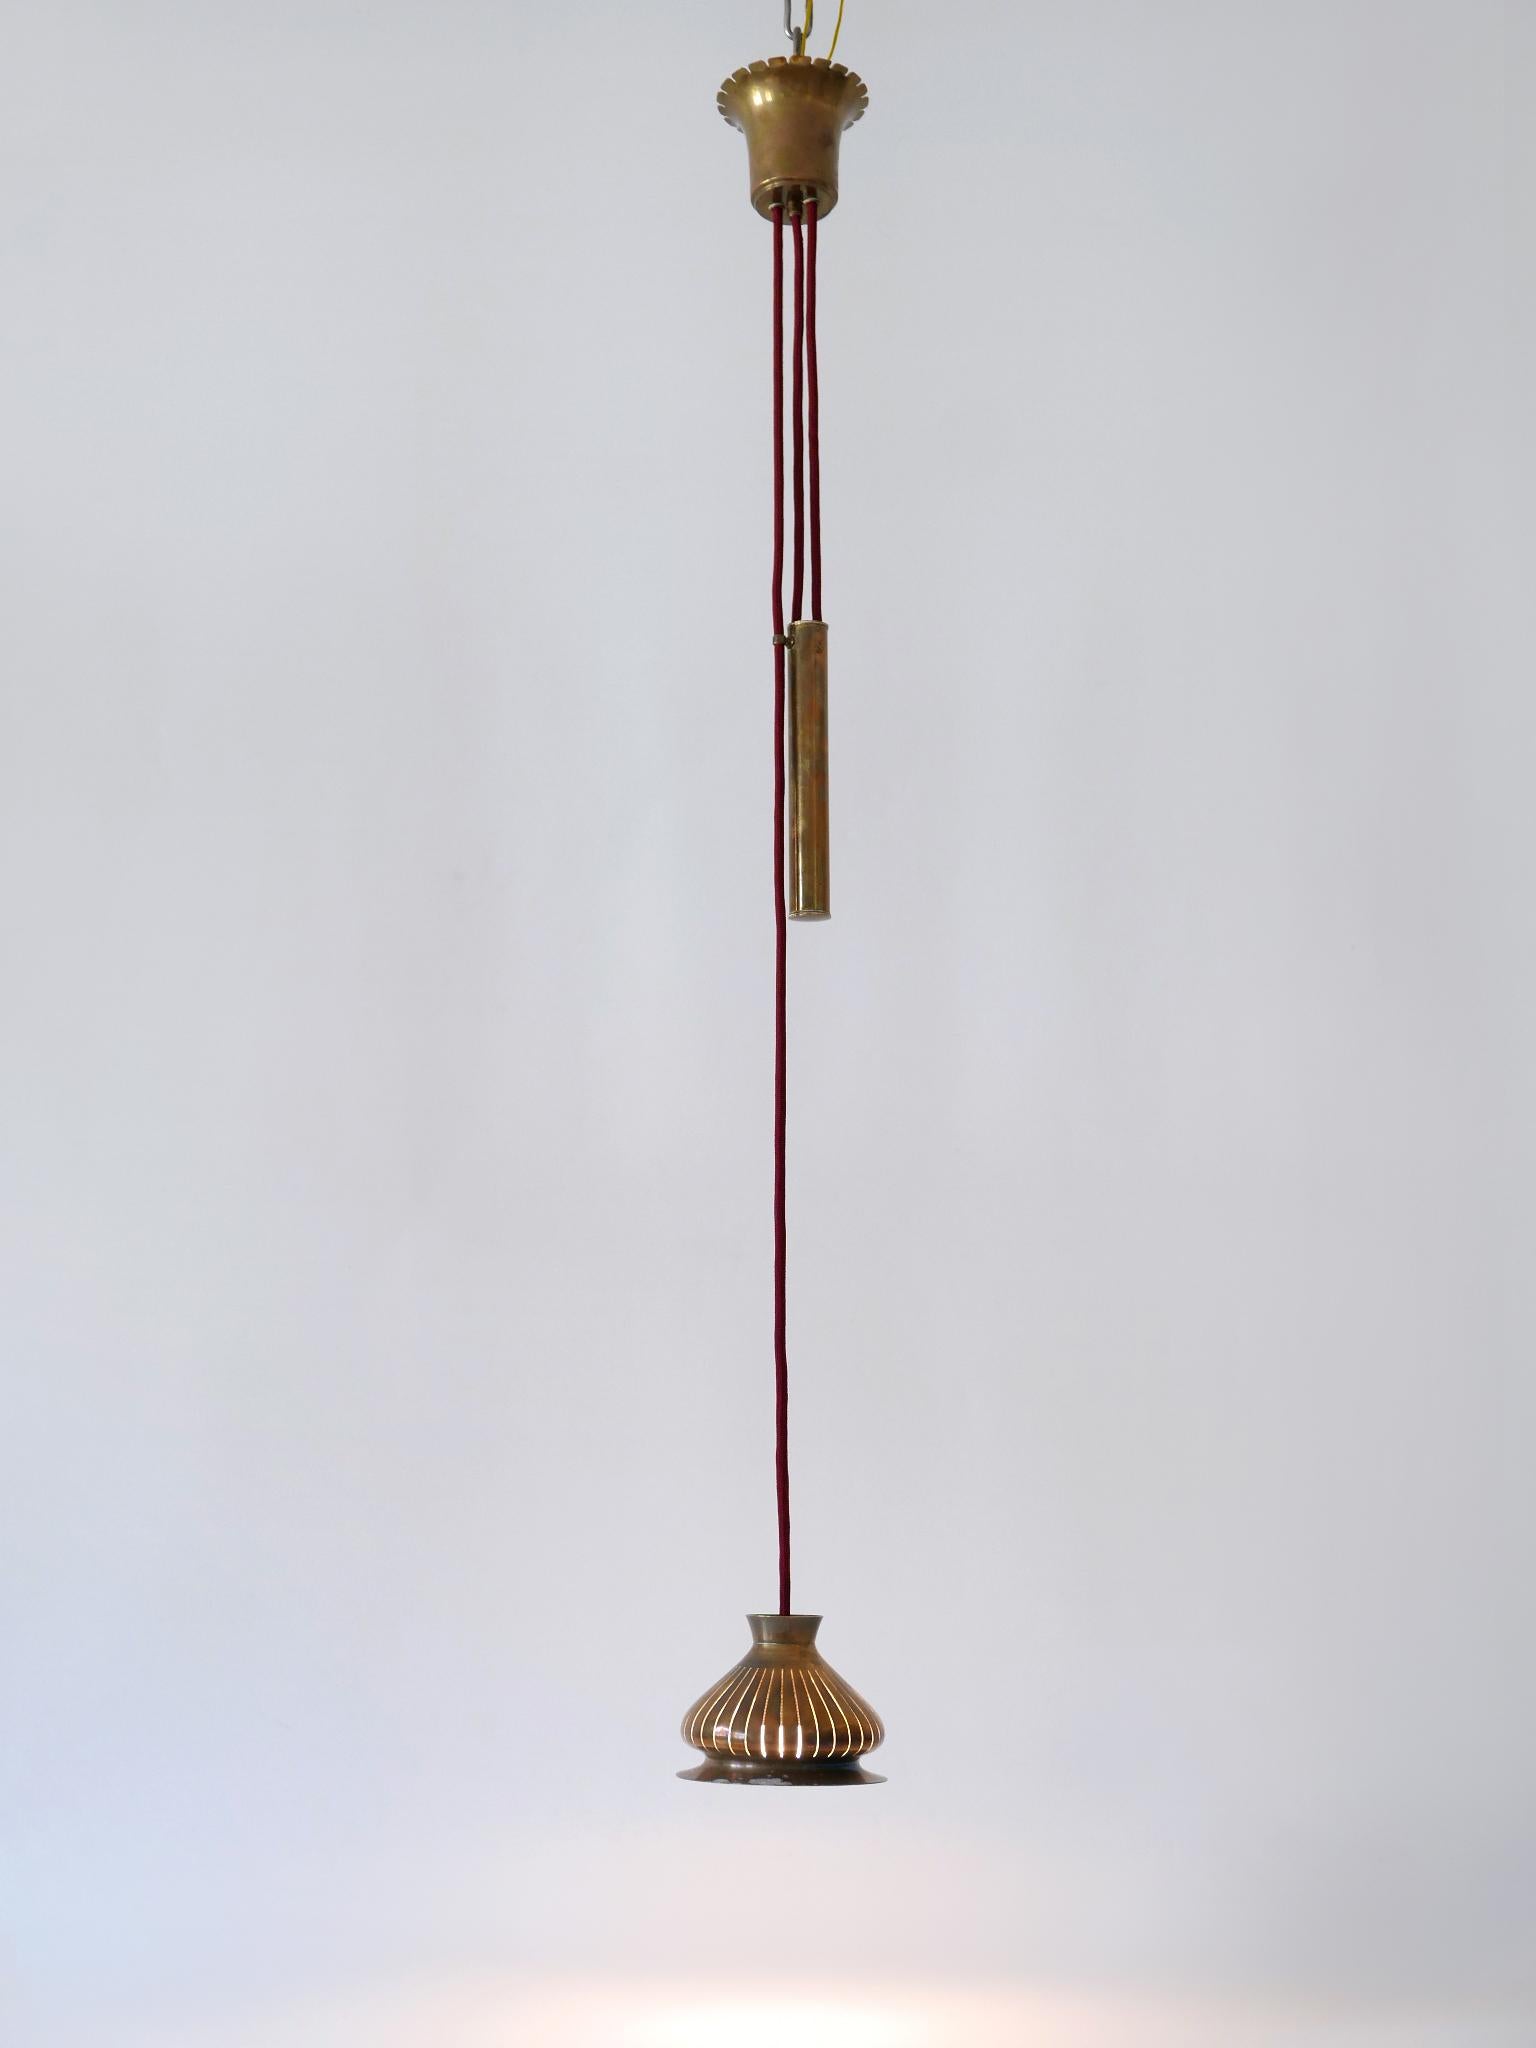 Extremely Rare Mid Century Modern Counterweight Brass Pendant Lamp Germany 1950s For Sale 3